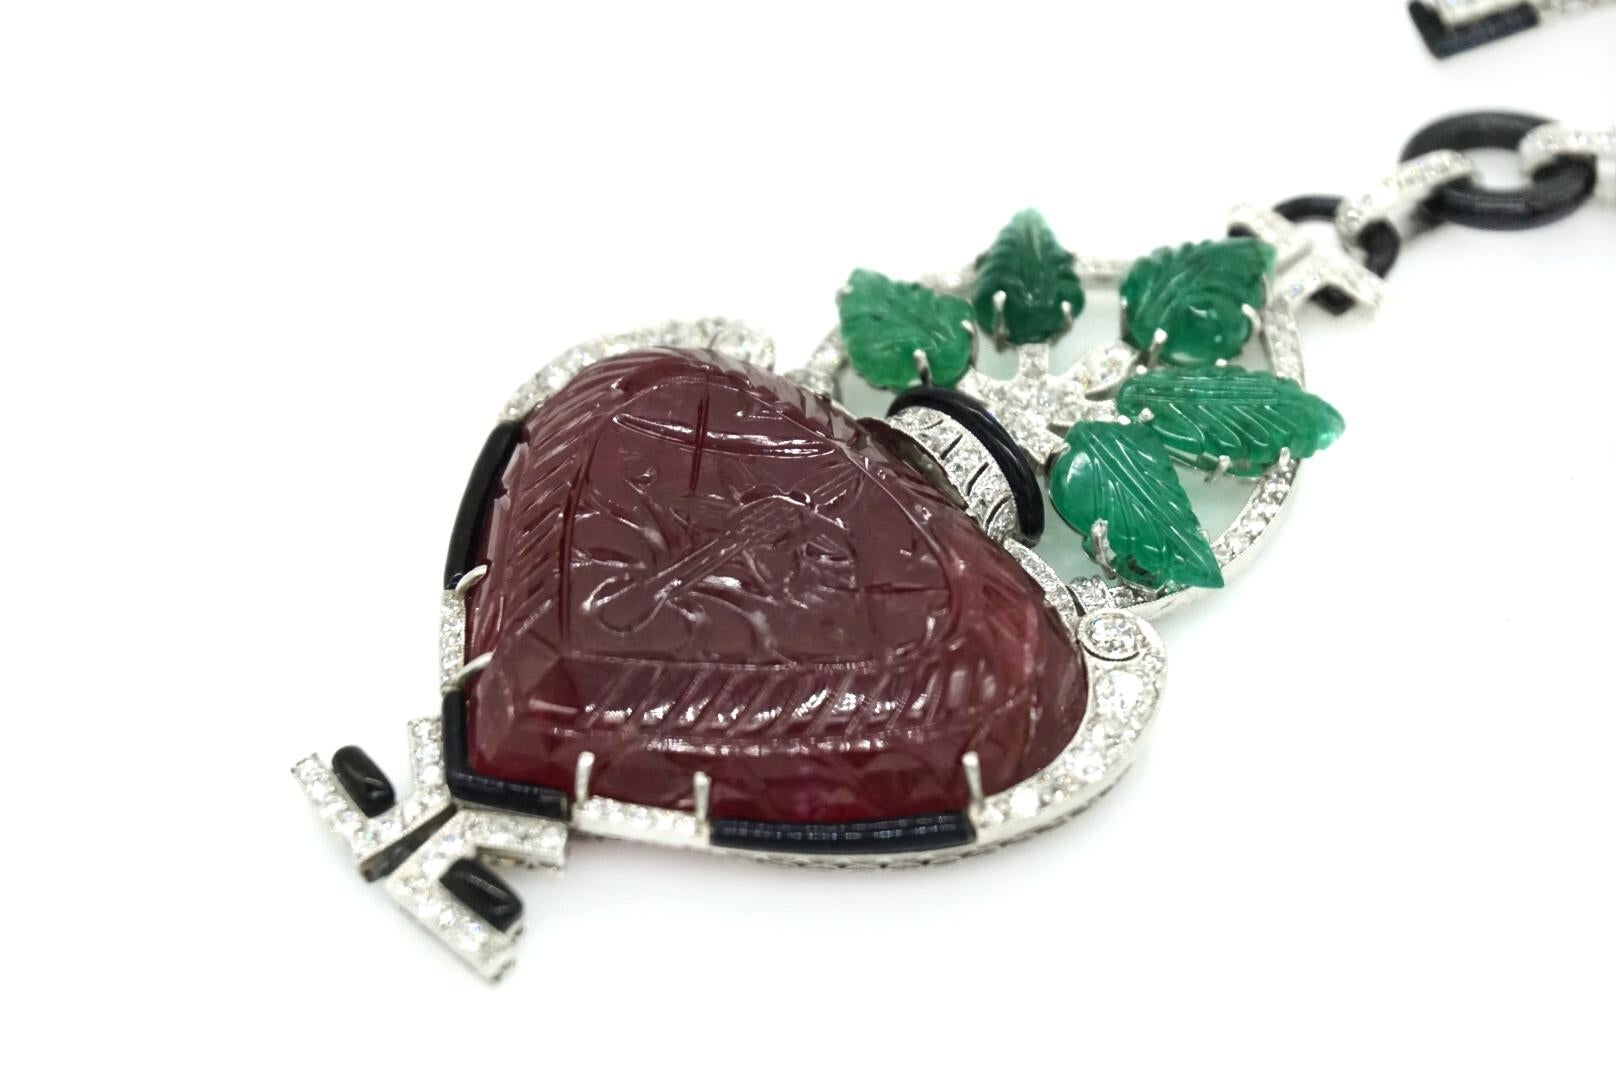 An Art Deco Pendant/Lapel Brooch mounted in platinum, with onyx and old-cut diamonds, with carved leaf emeralds and a large carved heart-shaped ruby. Made in Austria,  circa 1925.